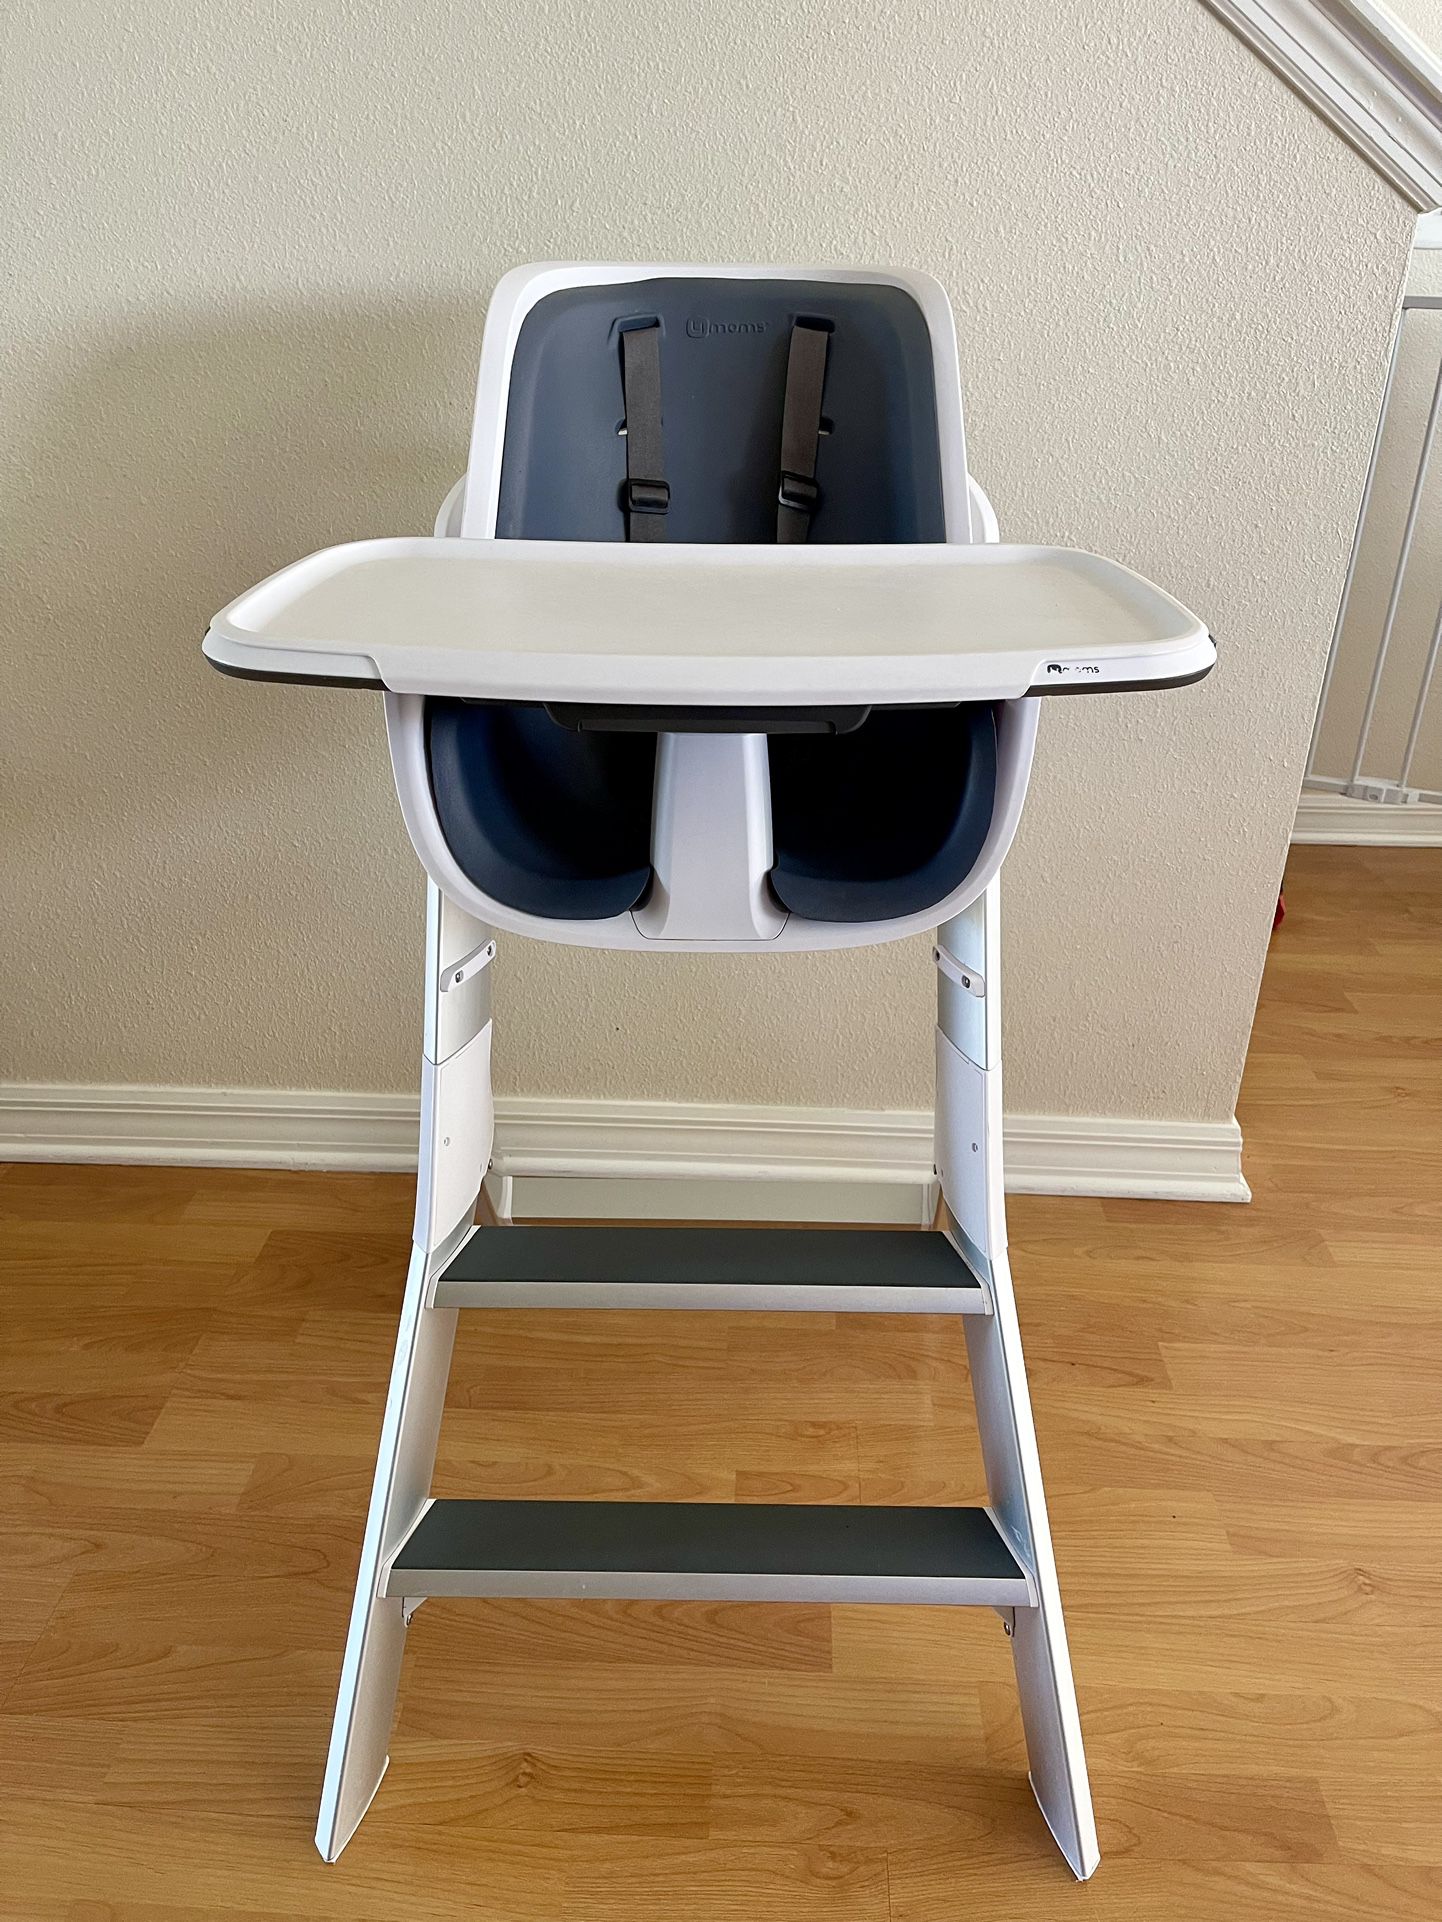 4moms Magnetic High Chair